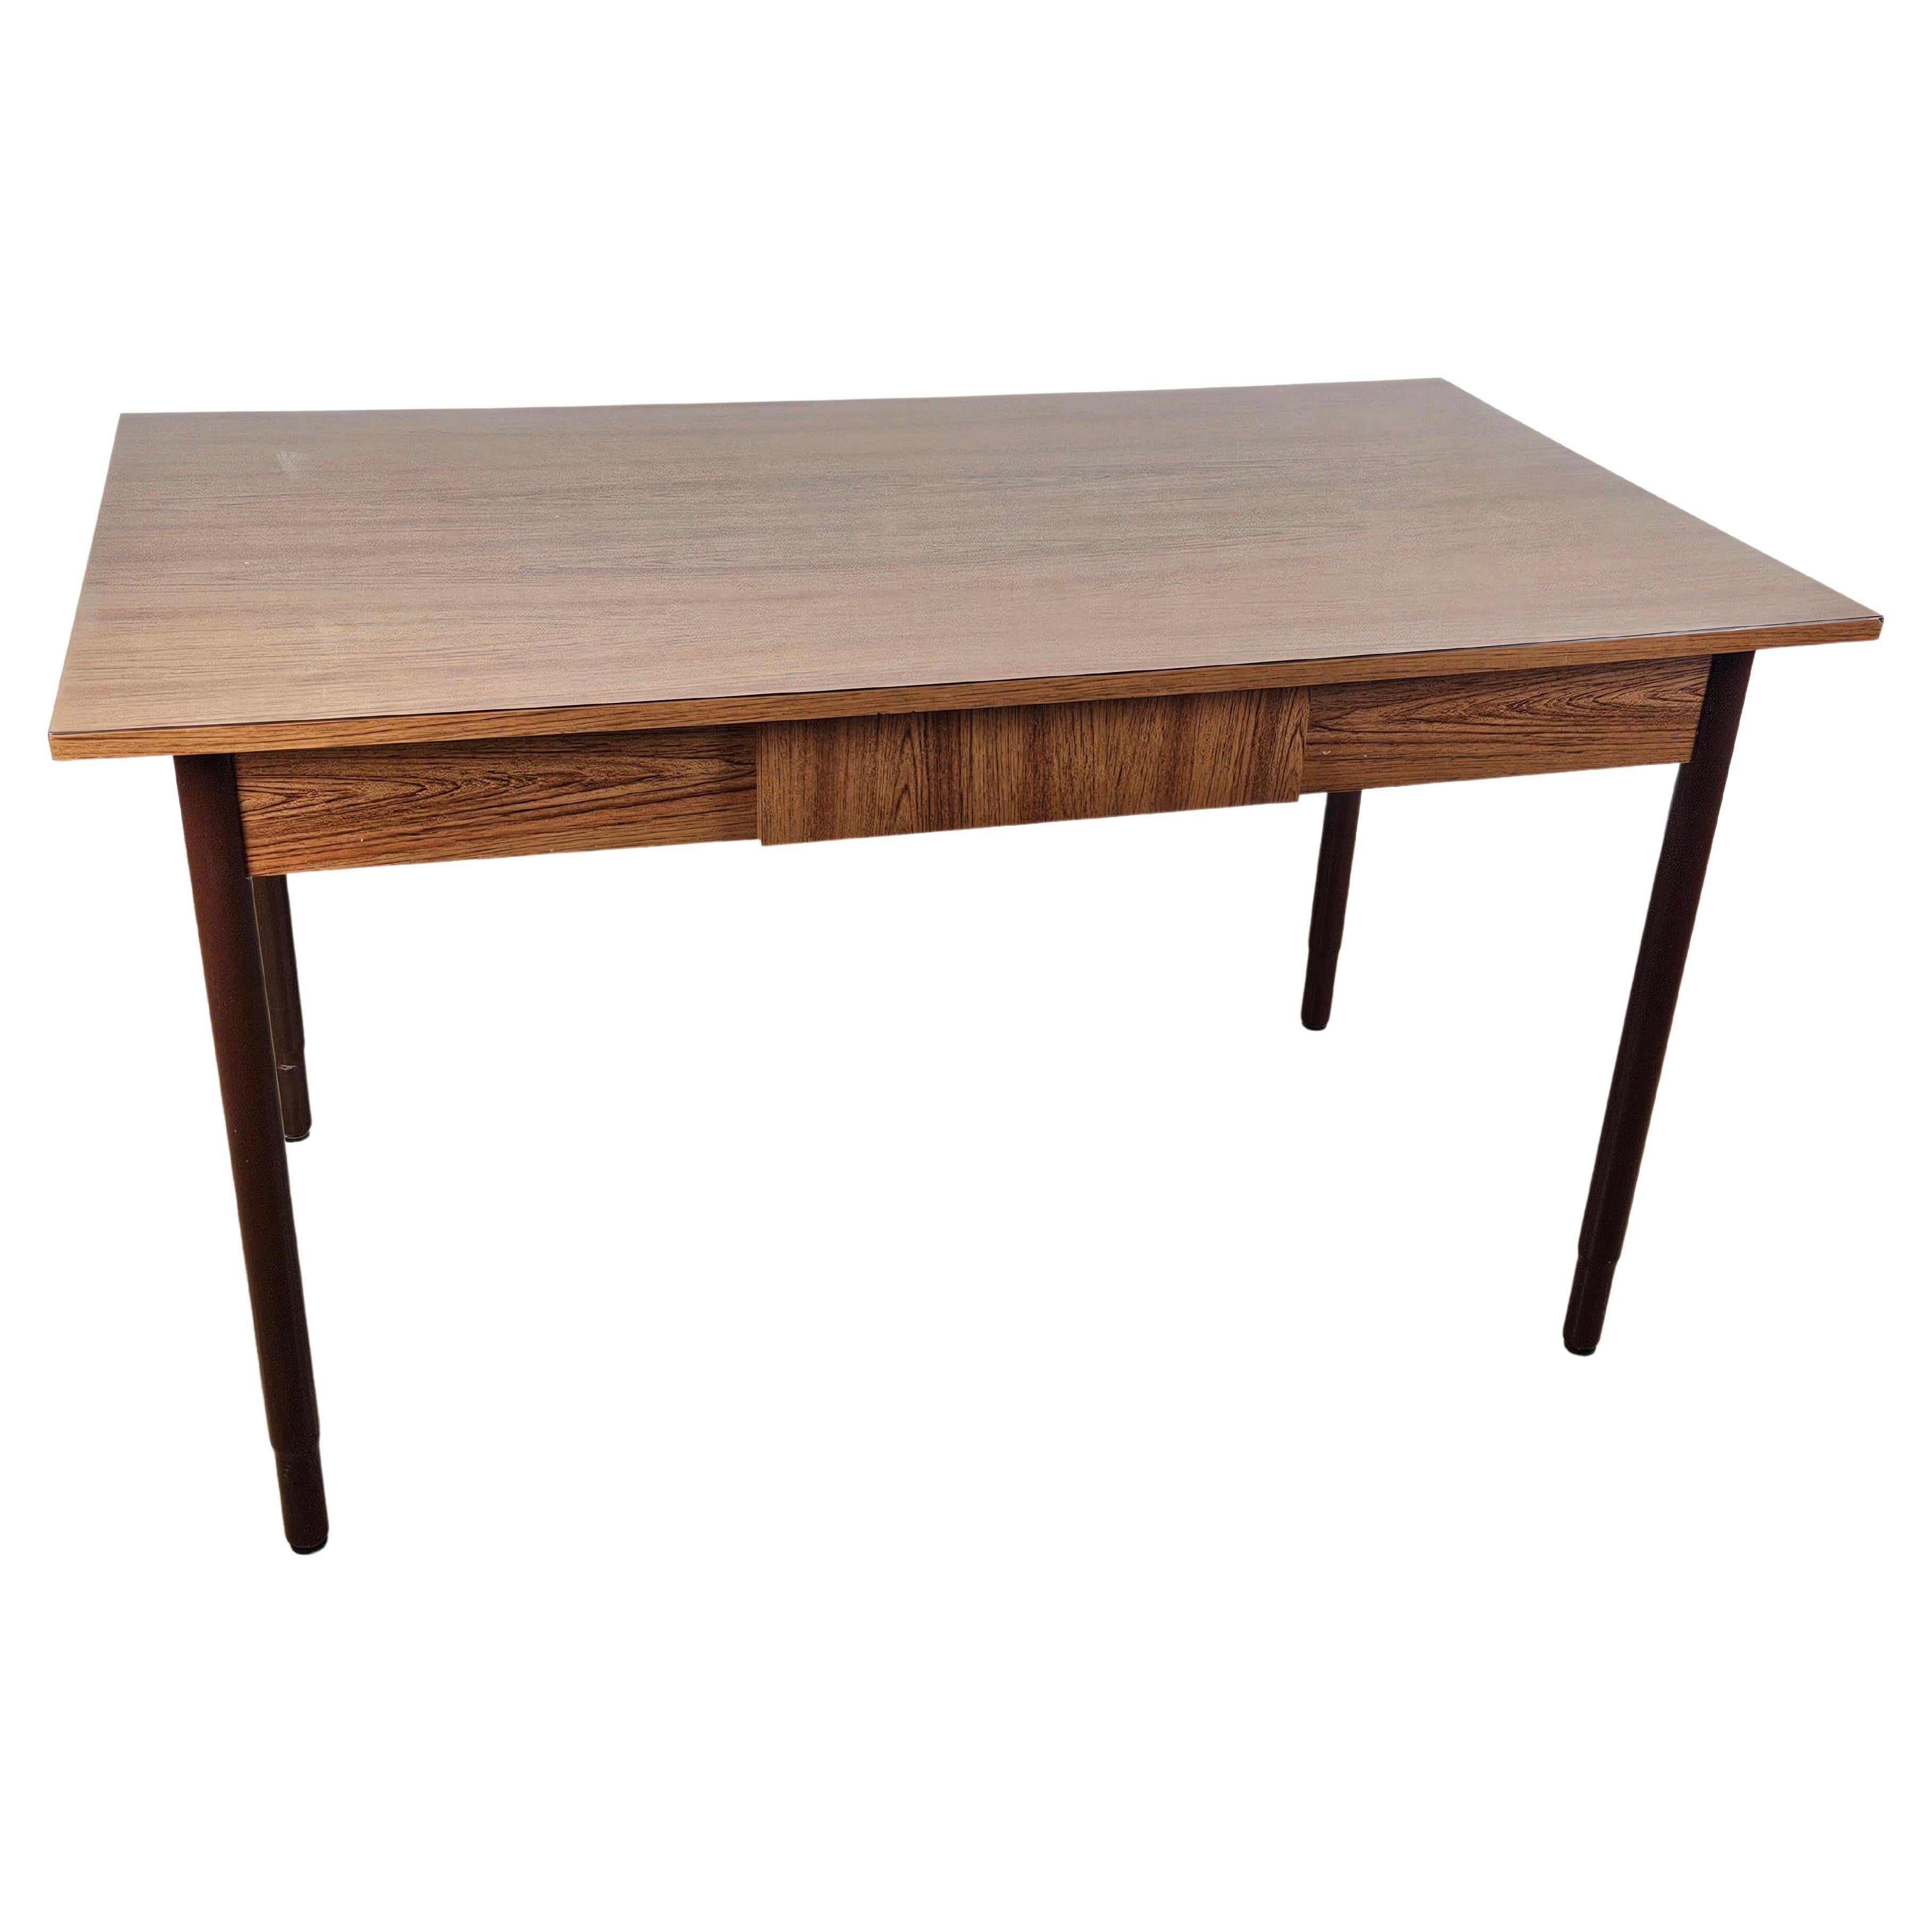 1970s formica dining table with drawer For Sale